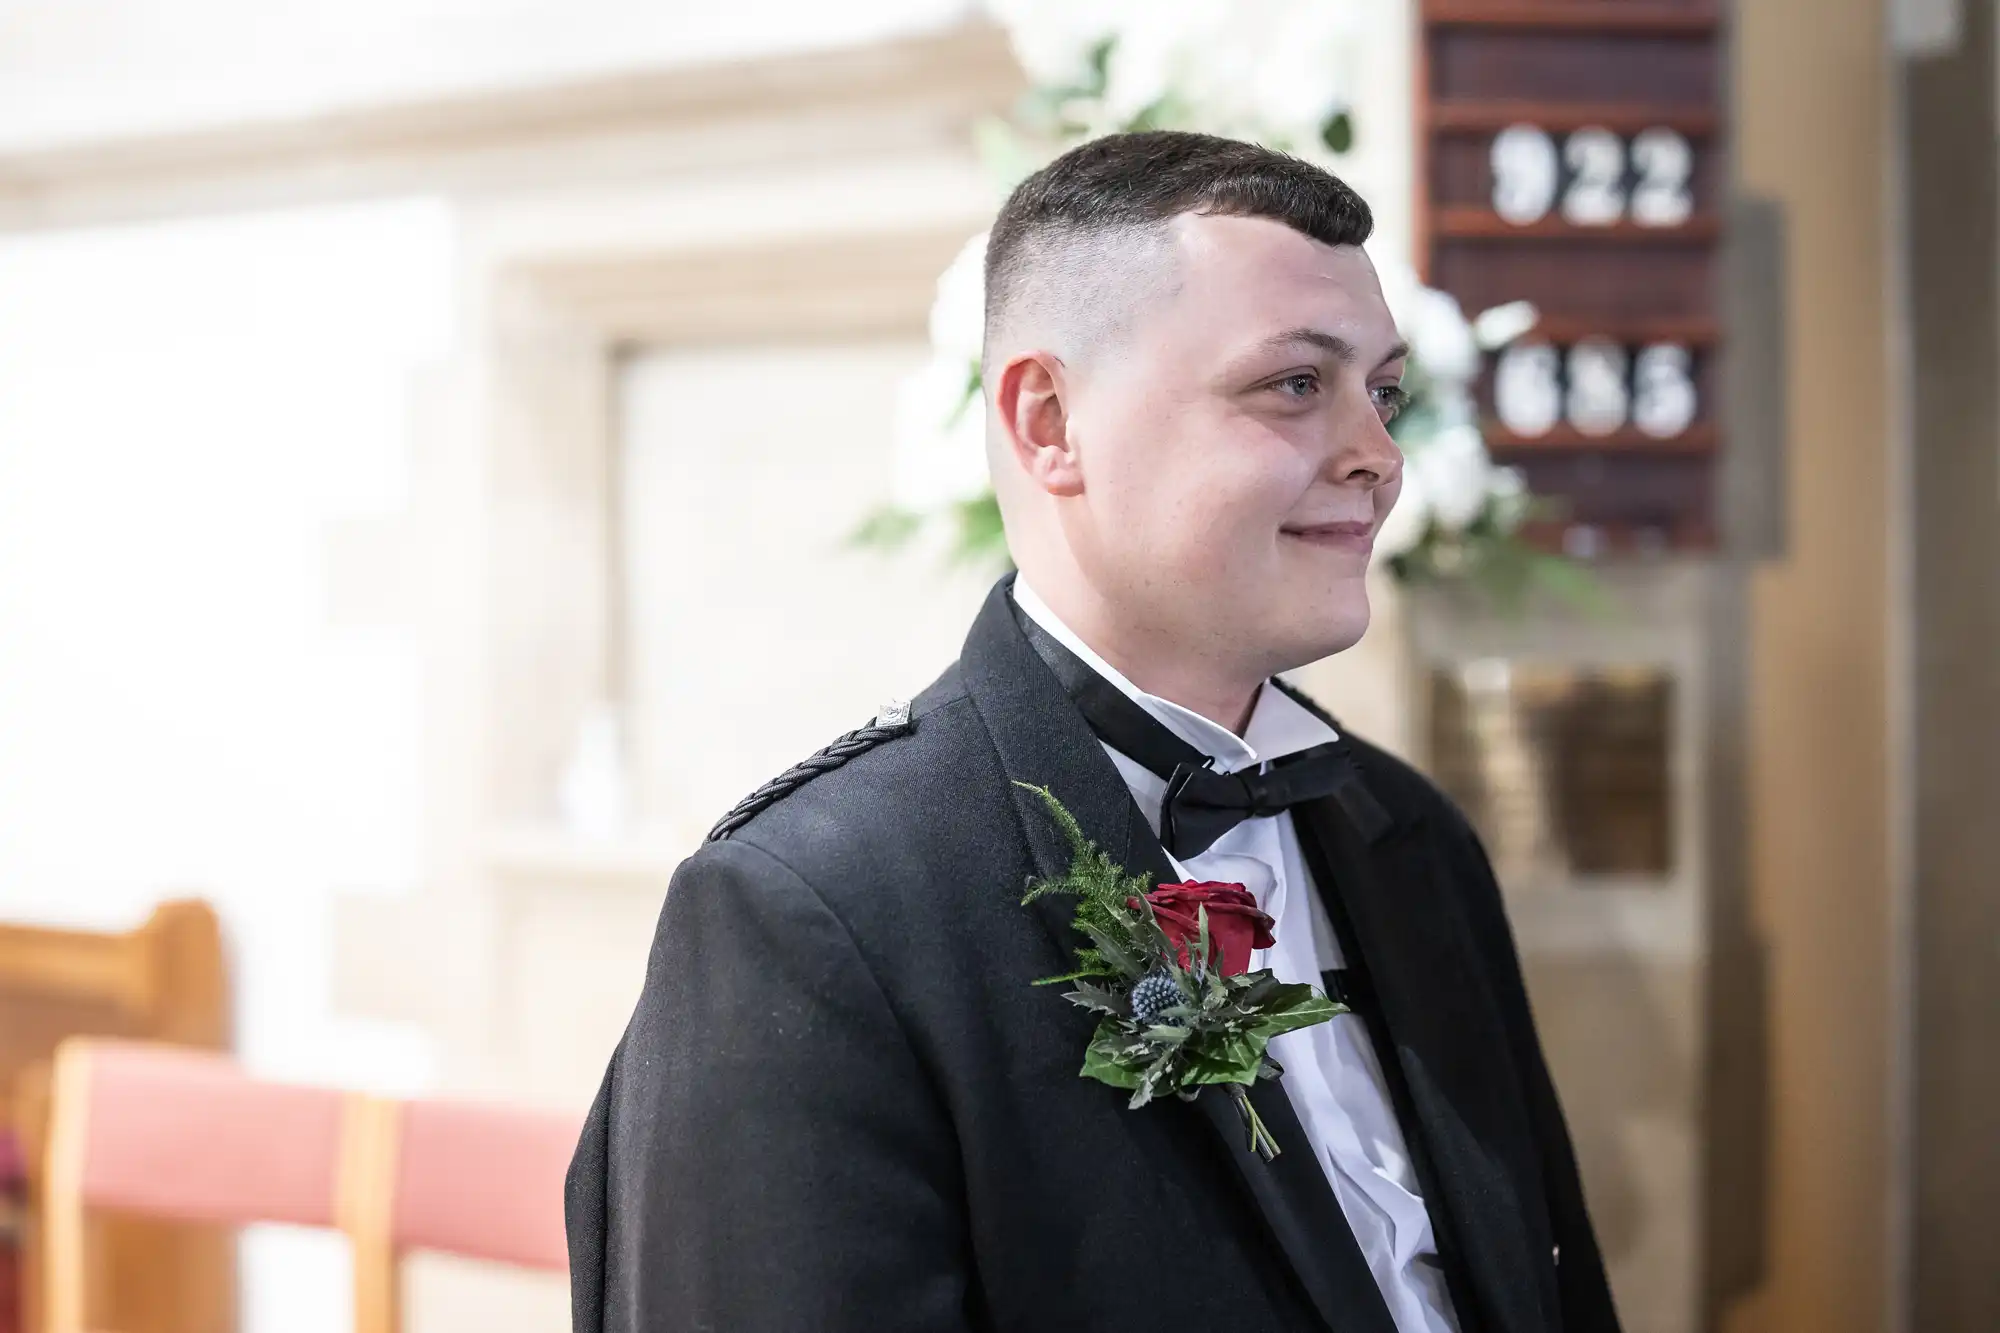 Groom in a black tuxedo with a red rose boutonniere smiling inside a church during a wedding ceremony.